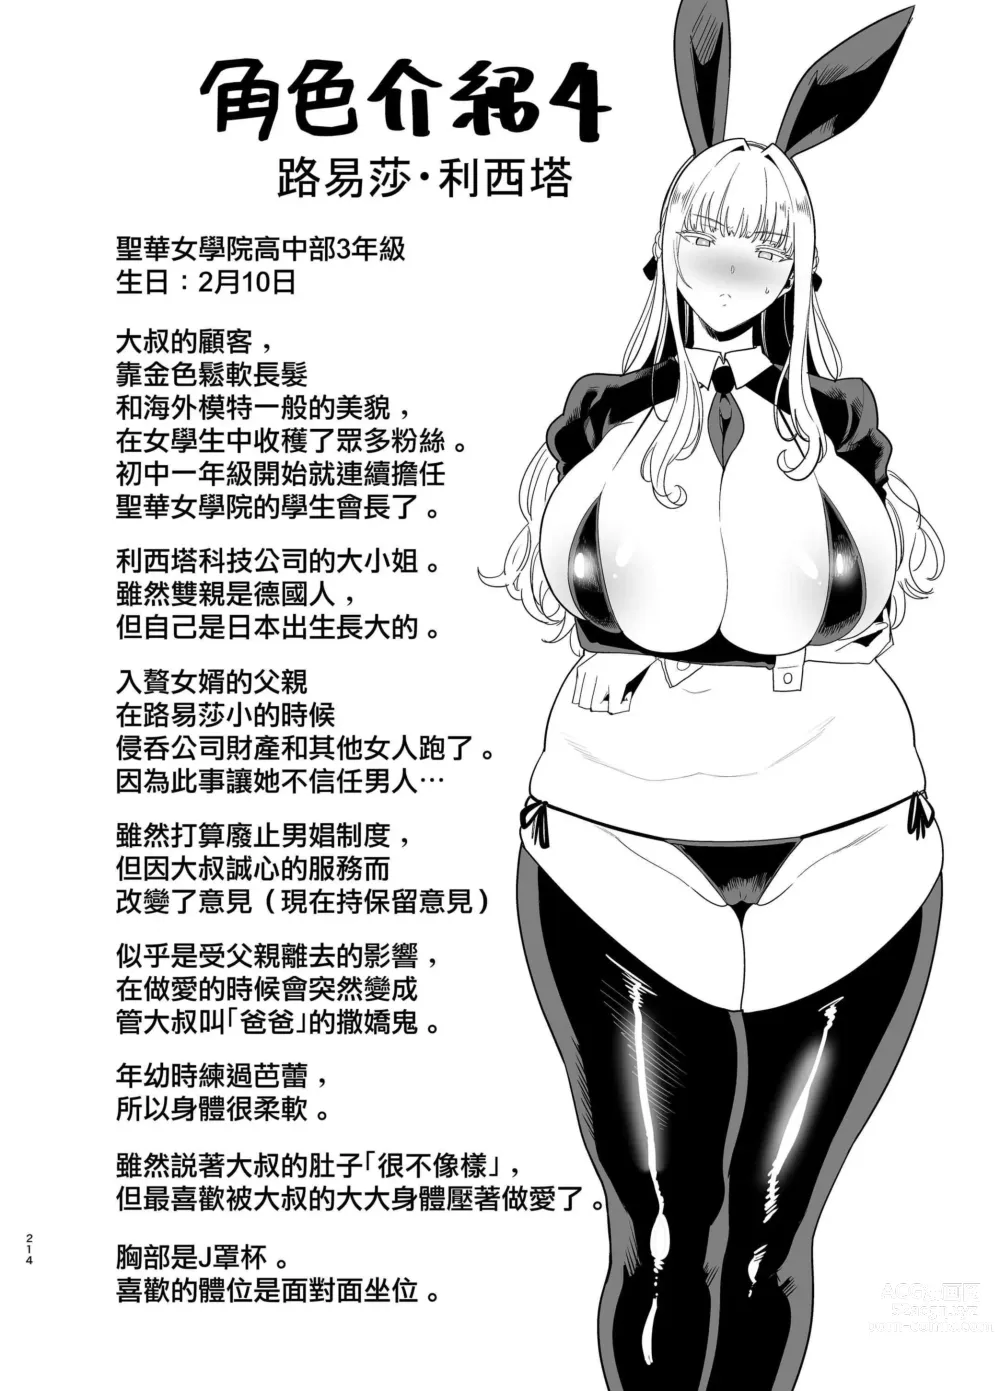 Page 277 of doujinshi 聖華女学院高等部公認竿おじさん 1-6